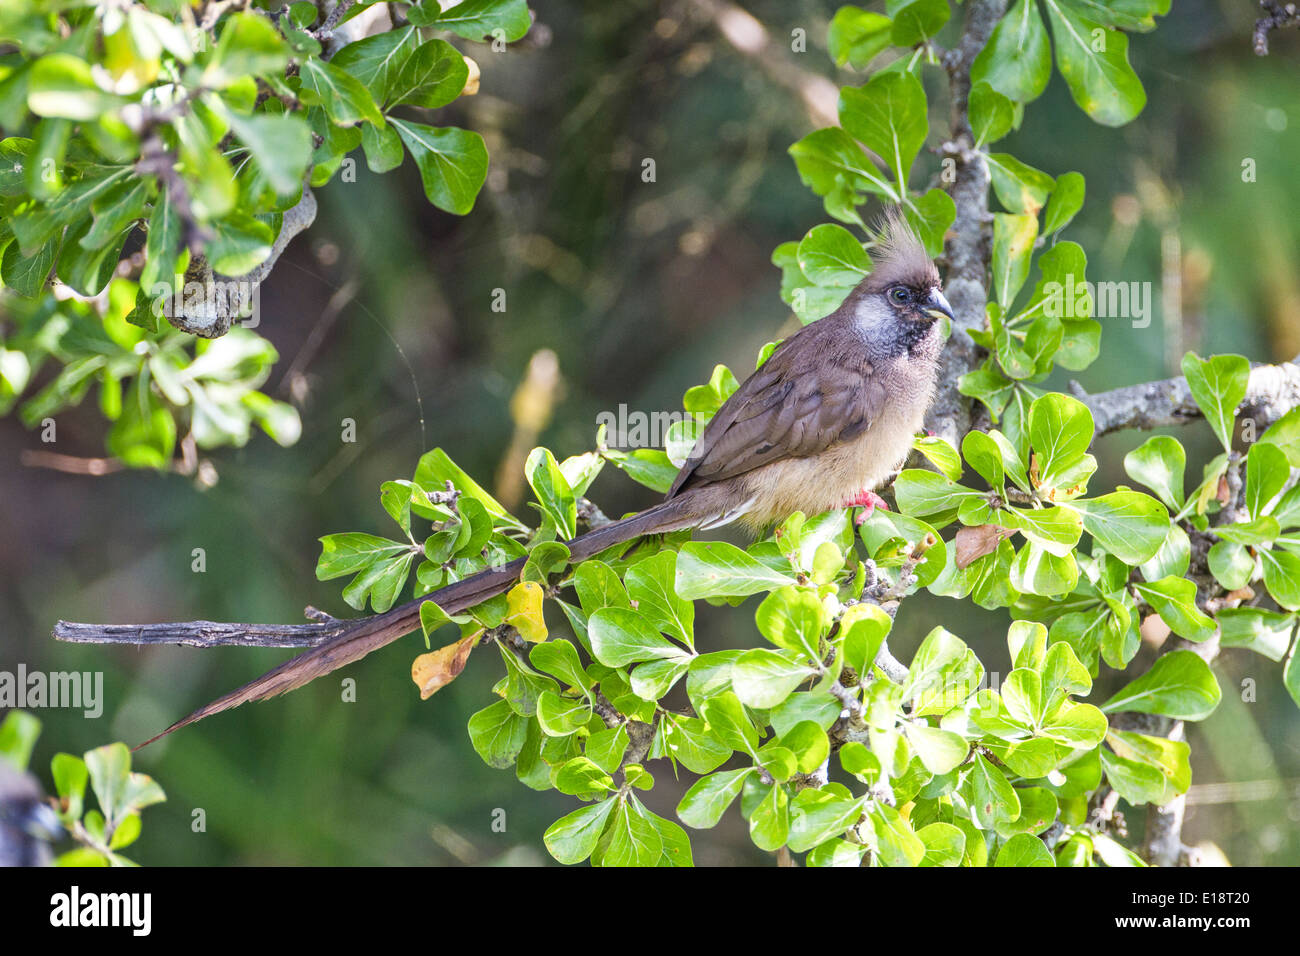 Speckled mousebird (Colius striatus) fluffed up and perching on a bush Stock Photo